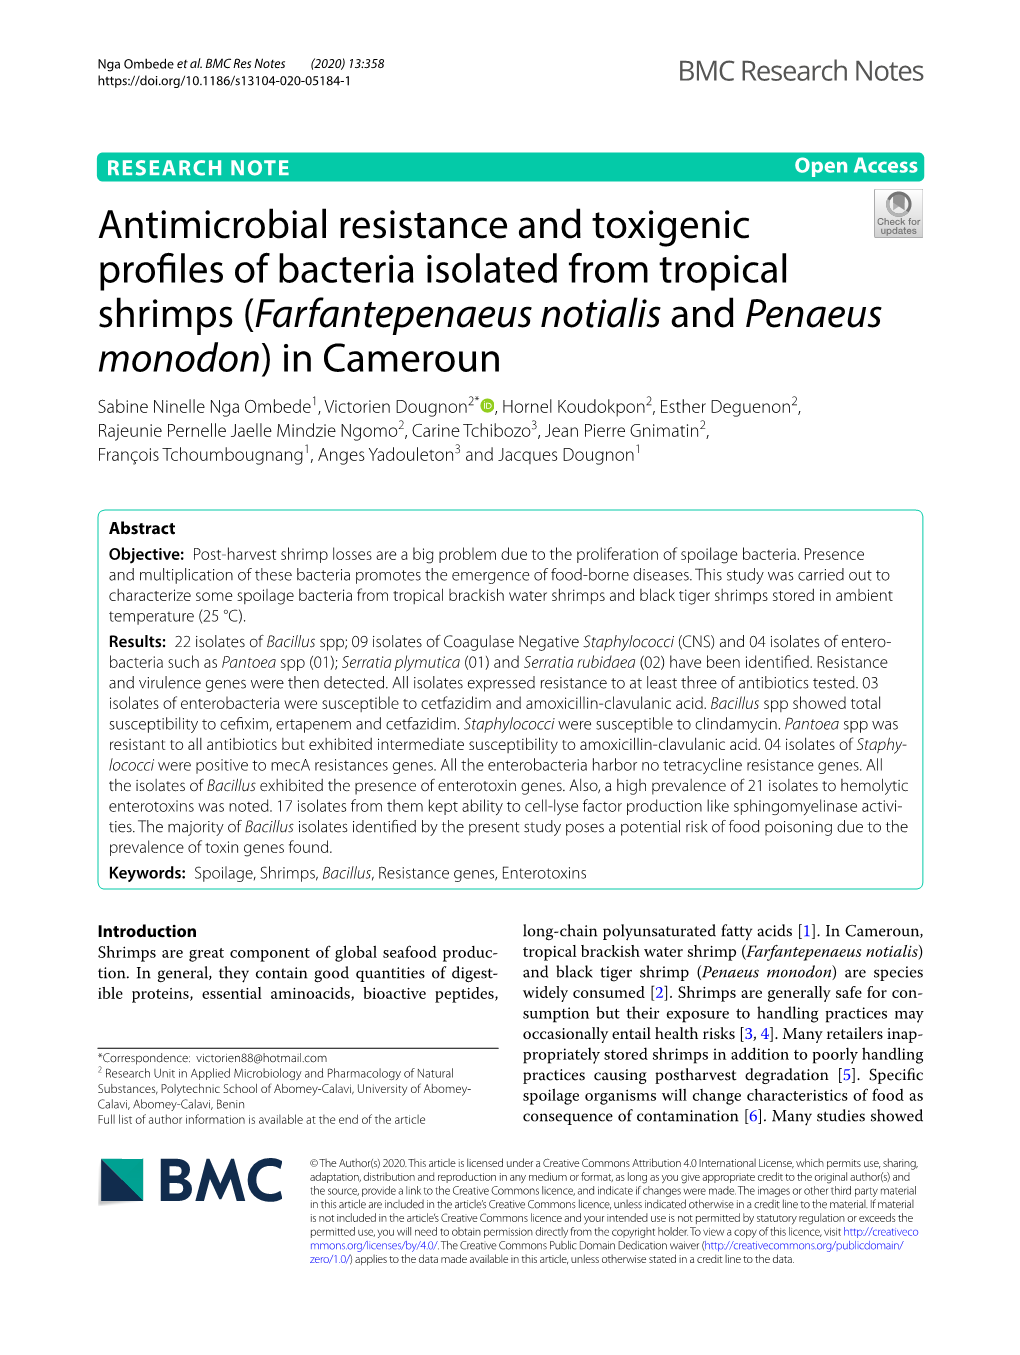 Antimicrobial Resistance and Toxigenic Profiles of Bacteria Isolated From